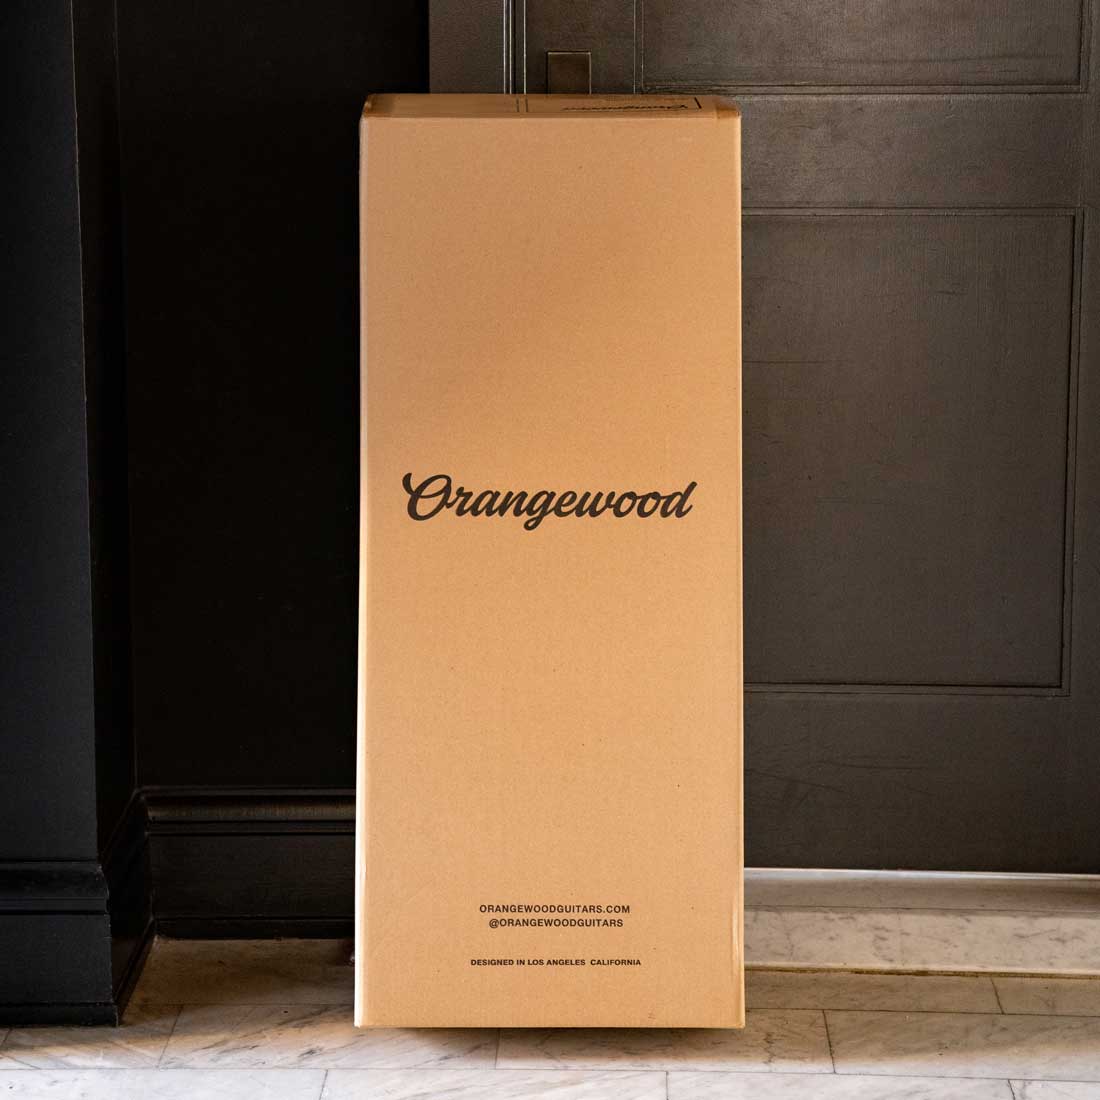 Orangewood outer shipping box